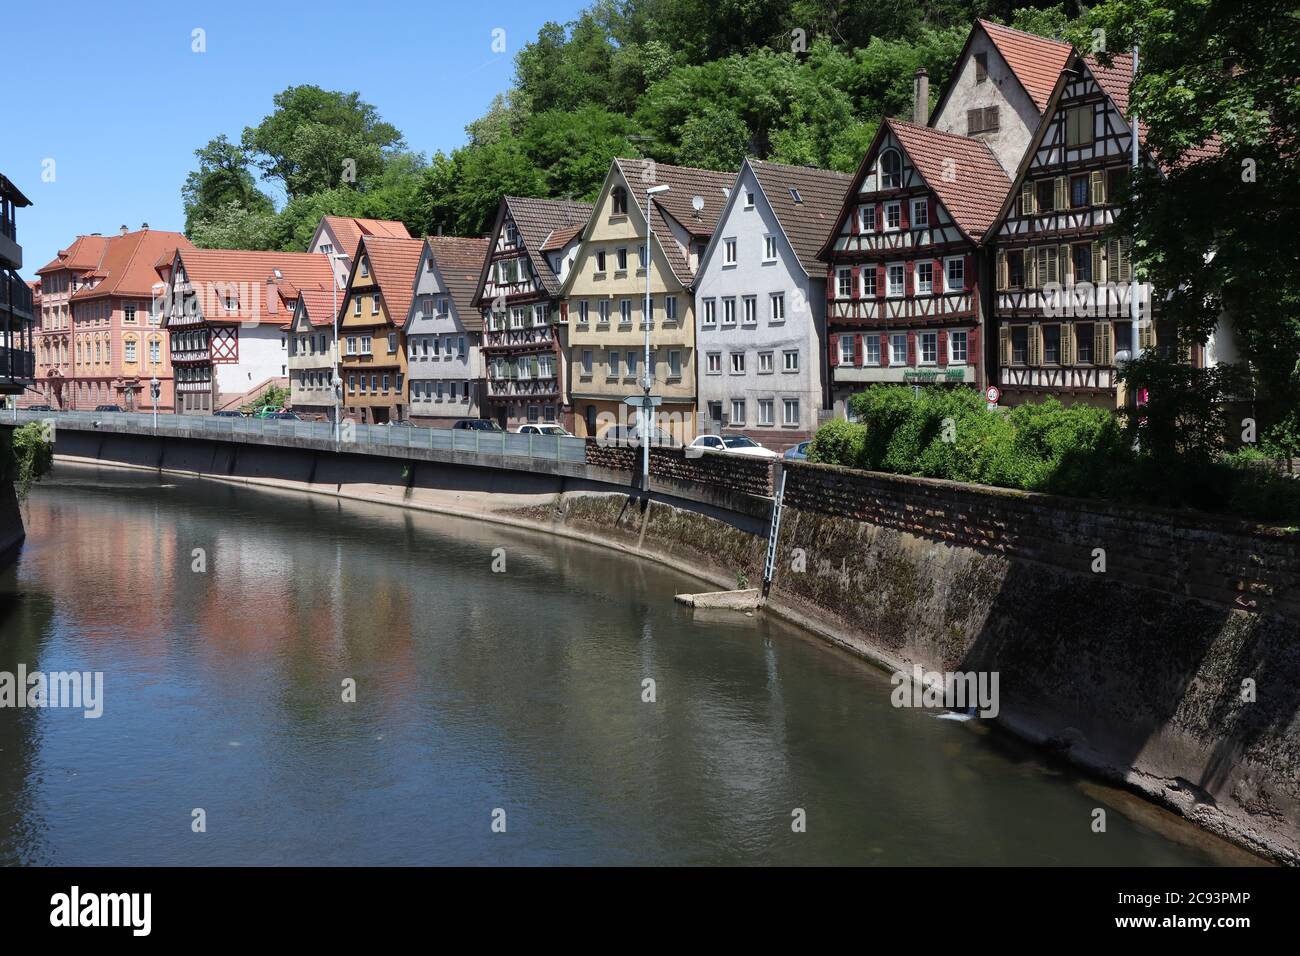 Calw, Baden-Württemberg/ Germany - June 02 2019: Timbered houses in the city centre of Calw, Germany - old medieval town Stock Photo